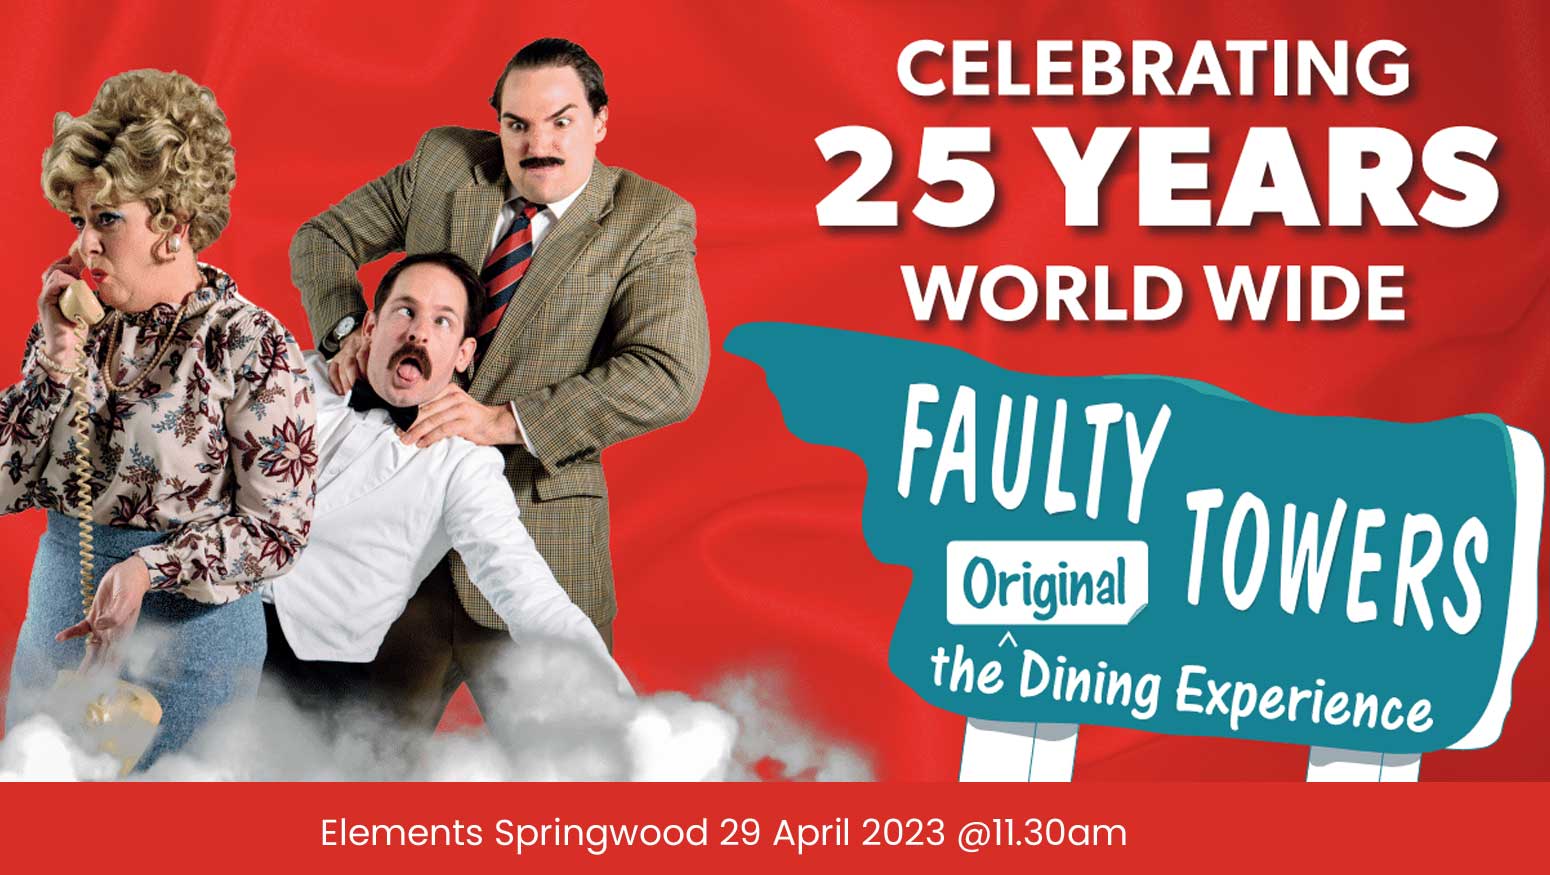 Faulty Towers The Dining Experience at Elements 29 April 2023